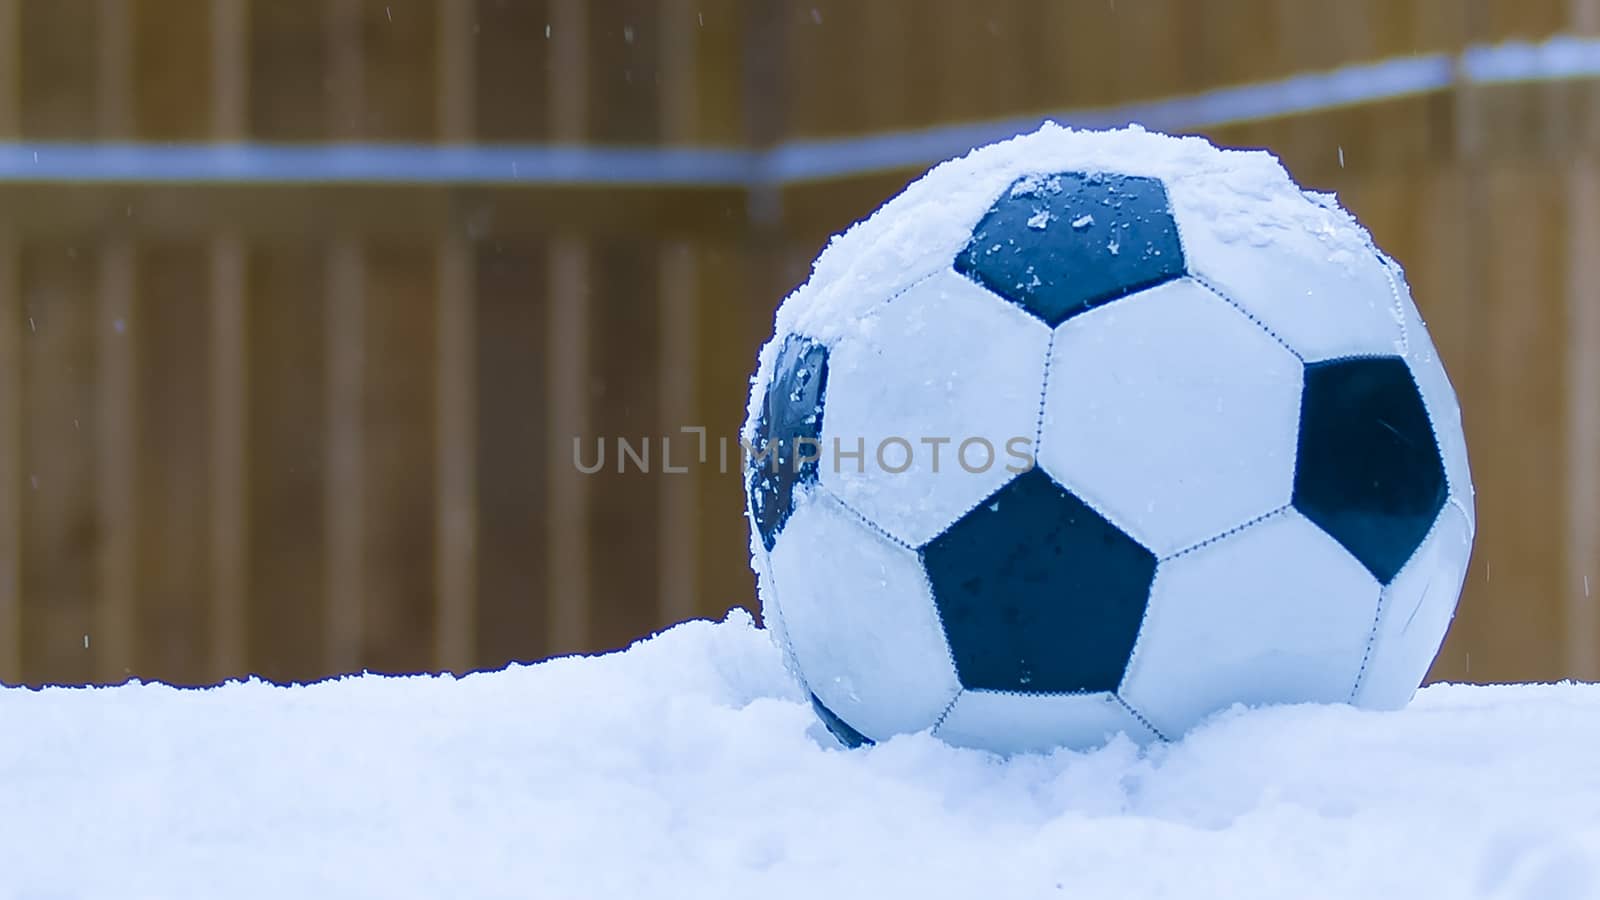 Football on snow during a winter snow storm with a wooden fence background by oasisamuel